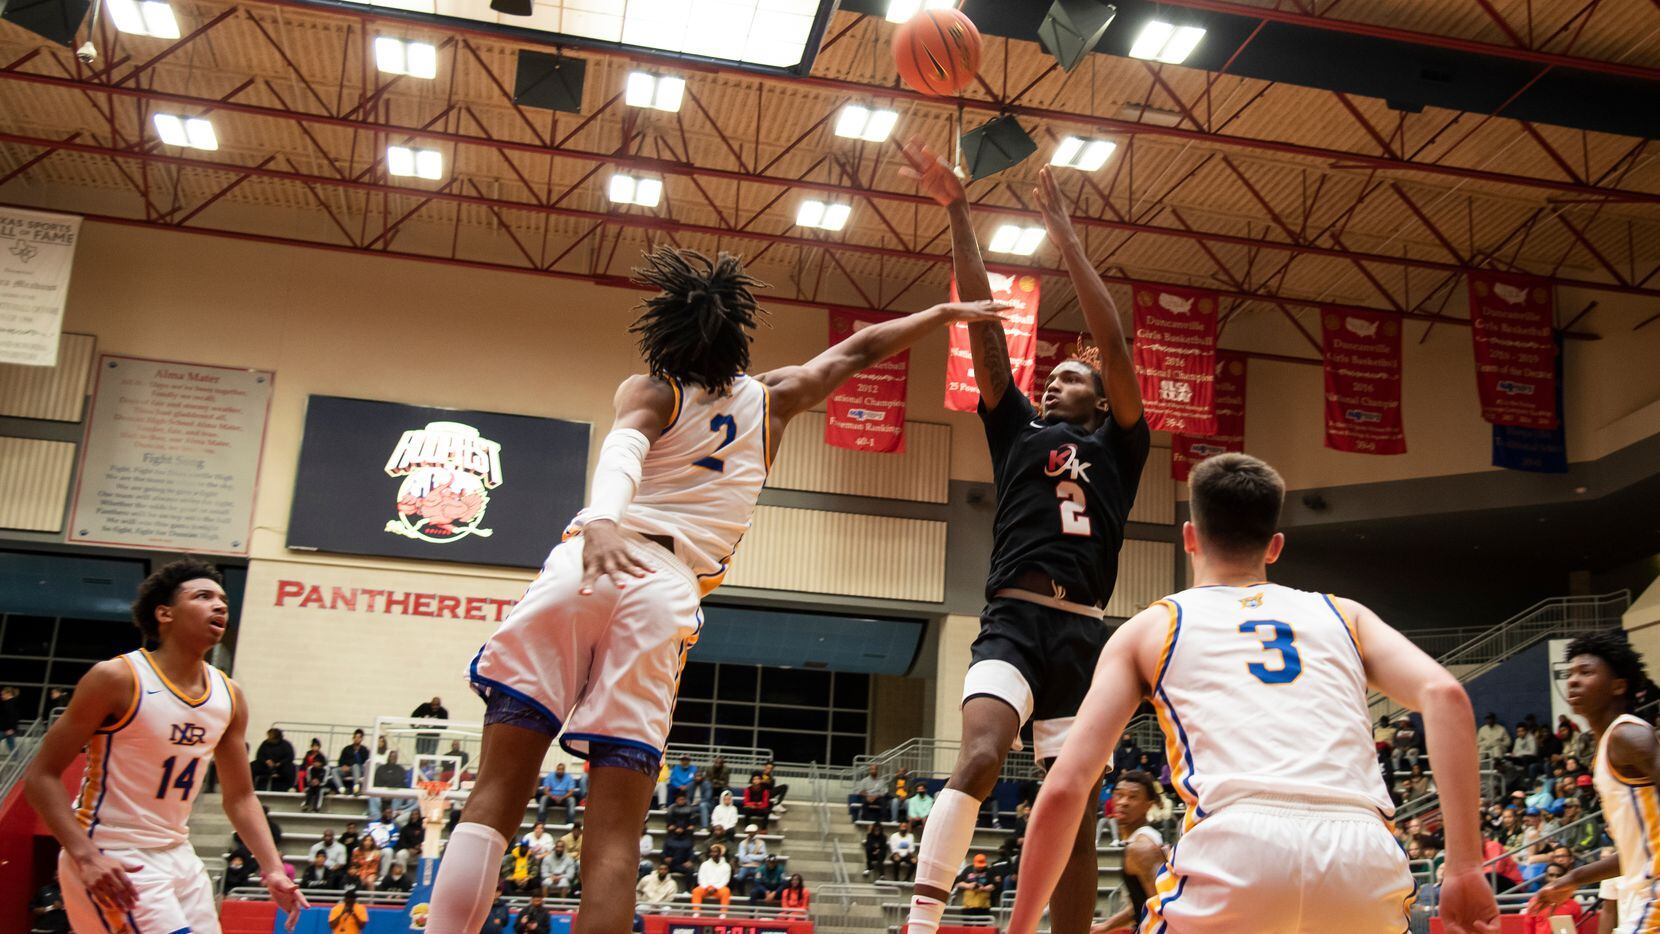 Kimball senior Arterio Morris (2) shoots a fadeaway jump shot during Kimball's Thanksgiving Hoopfest game against North Little Rock at Sandra Meadows Memorial Arena in Duncanville, Texas on Friday, November 26, 2021. (Emil Lippe/Special Contributor)